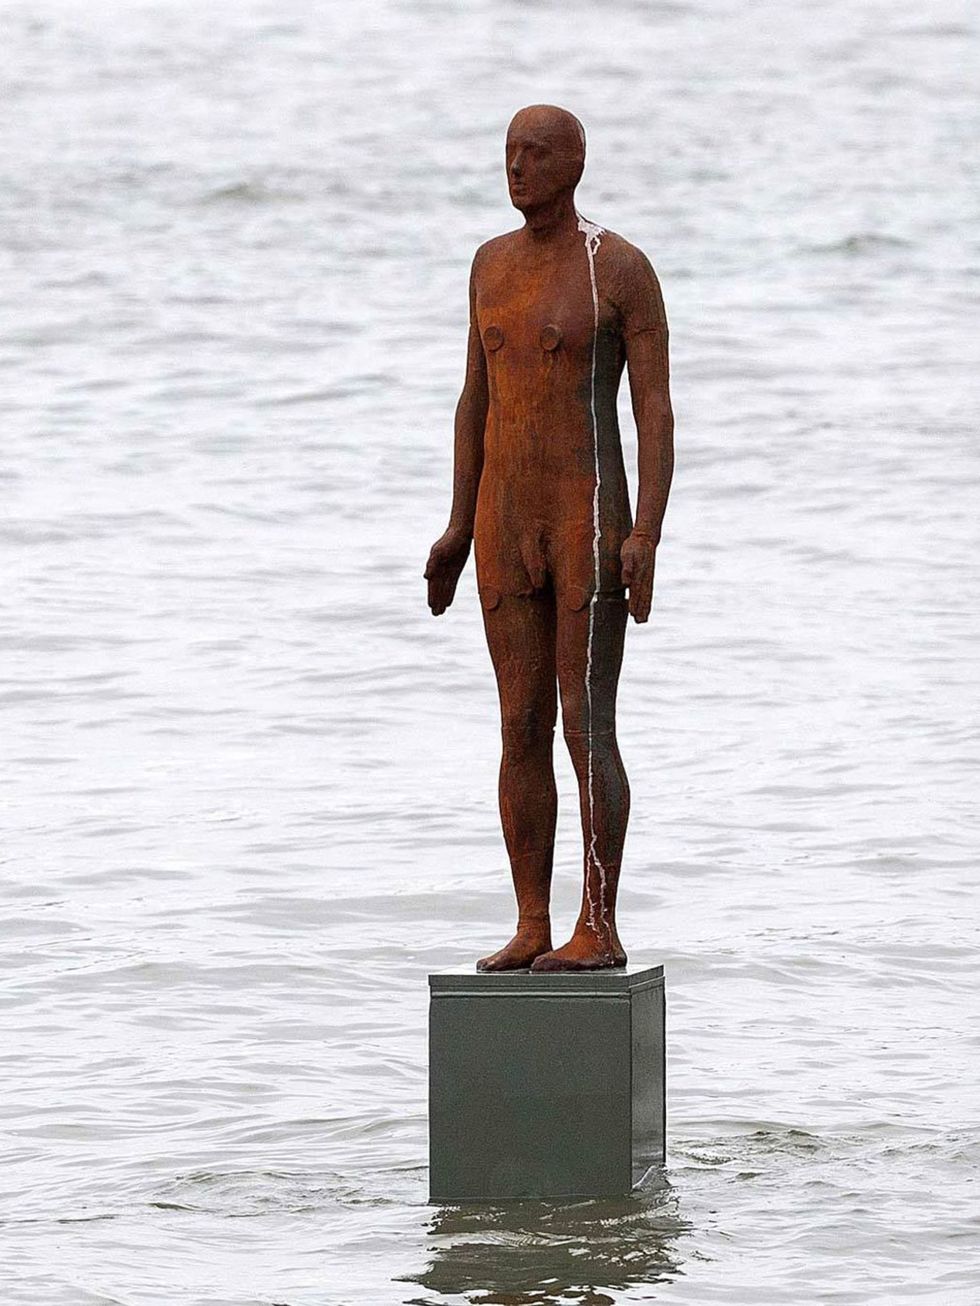 <p>Escape the gallery crowds and go on the hunt for the newly erected Antony Gormley sculpture standing in the Thames. The figure, which is part of Gormleys Another Time series, was sold to actor Sir Ian McKellen and can be found near his home in Limehou